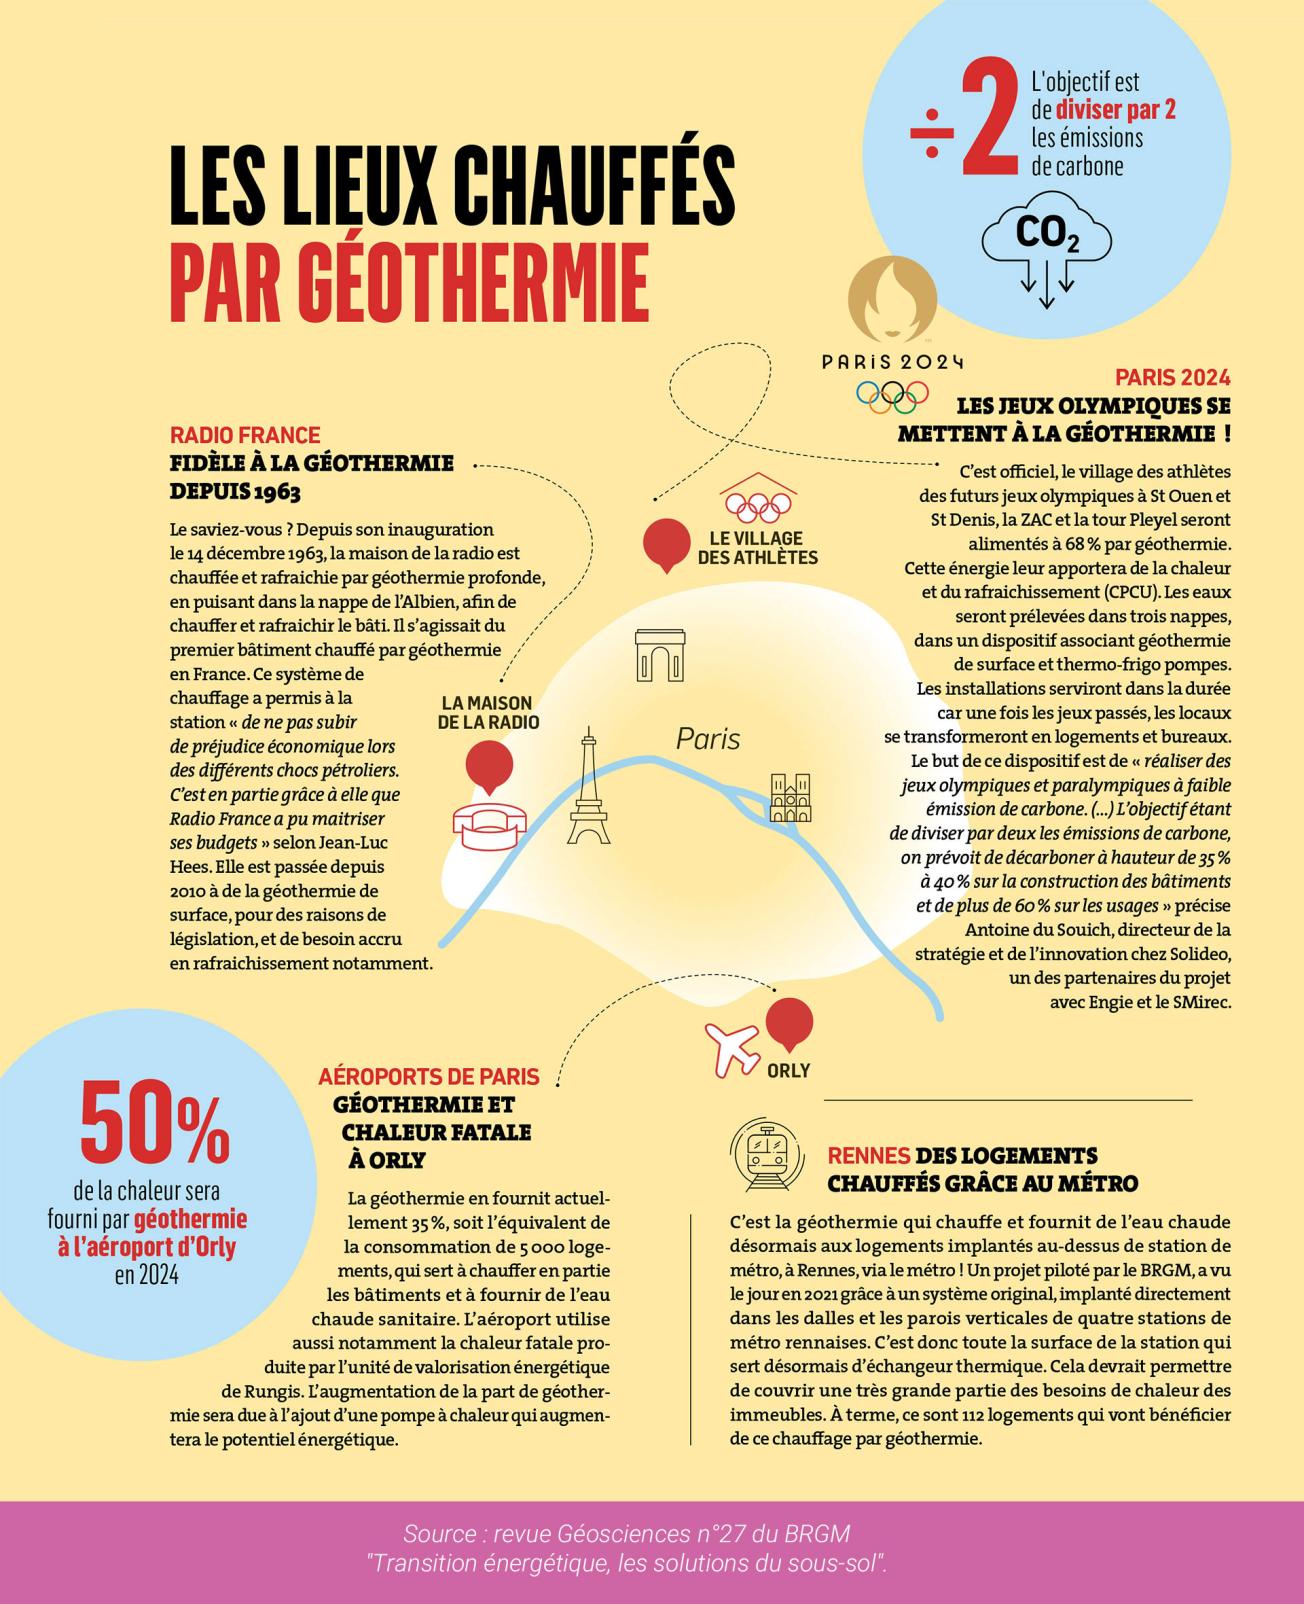 The "Places heated by geothermal energy" infographic, taken from the 27th edition of Géosciences, published in September 2023.